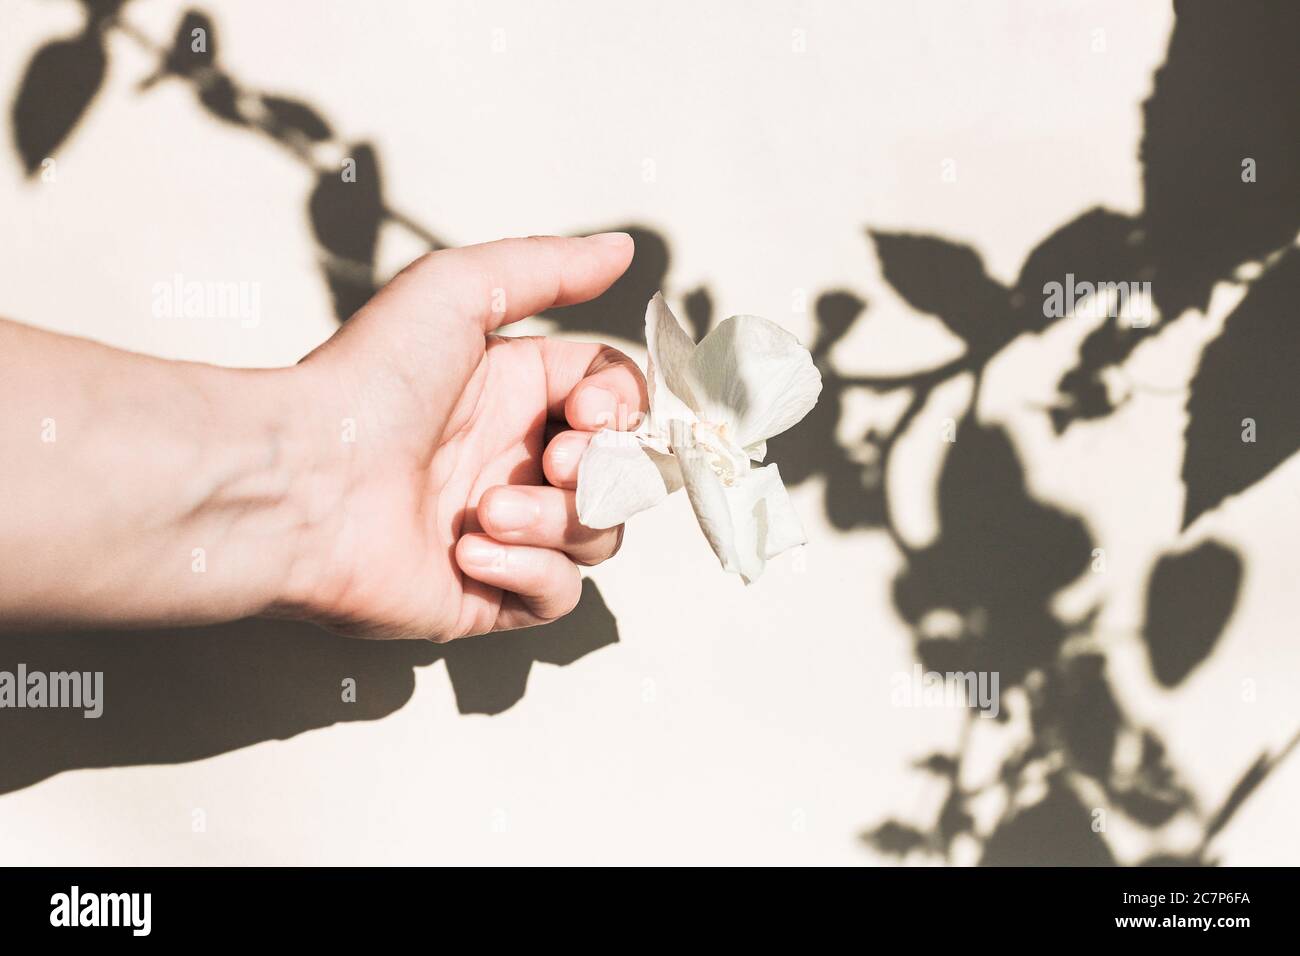 female hand with a dry white flower and a shadow from the leaves. Floral minimal design. The concept of fading, ending. Stock Photo